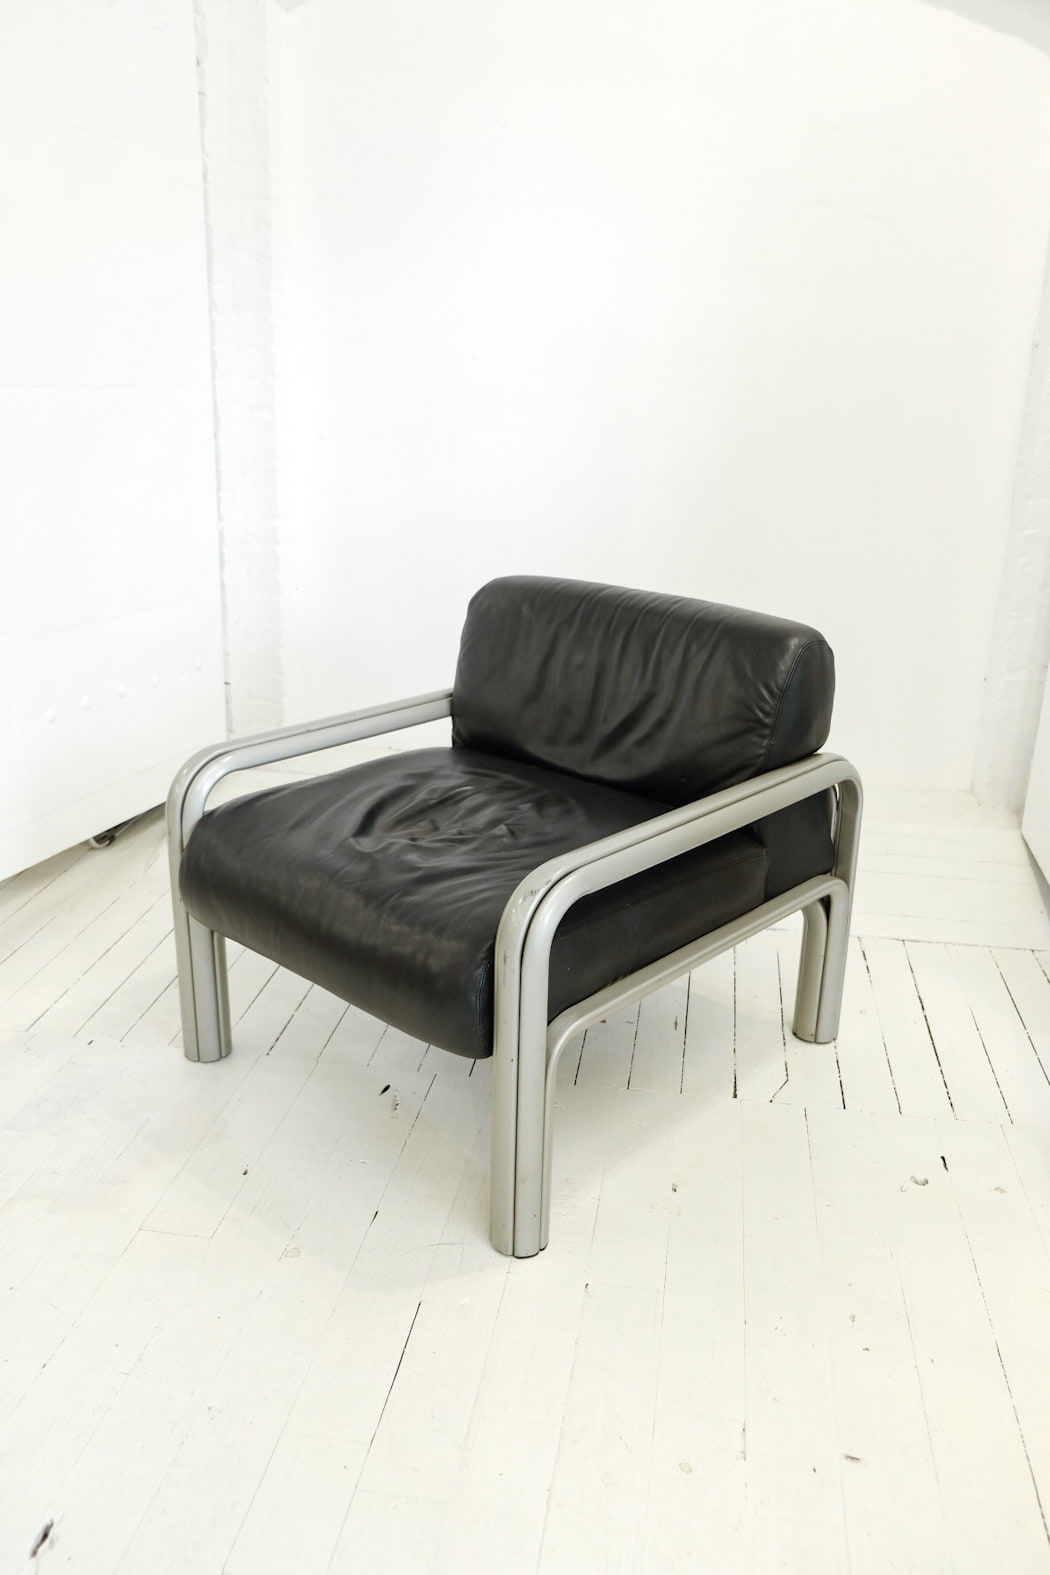 Gae Aulenti Lounge Chair for Knoll : RENTAL